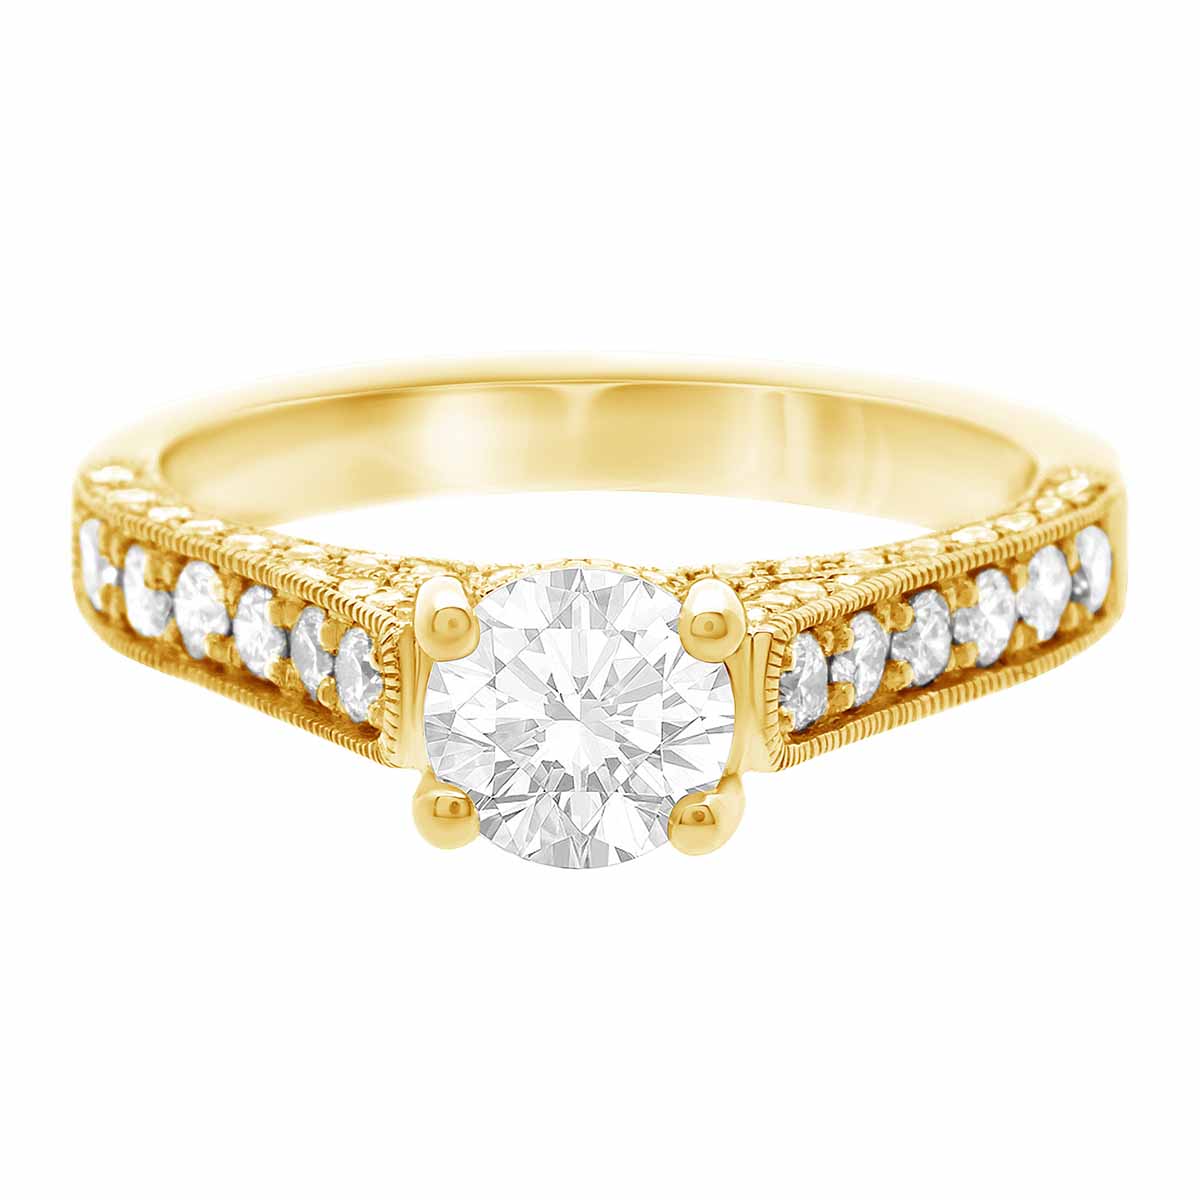 Diamond Encrusted Engagement Ring made in yellow gold